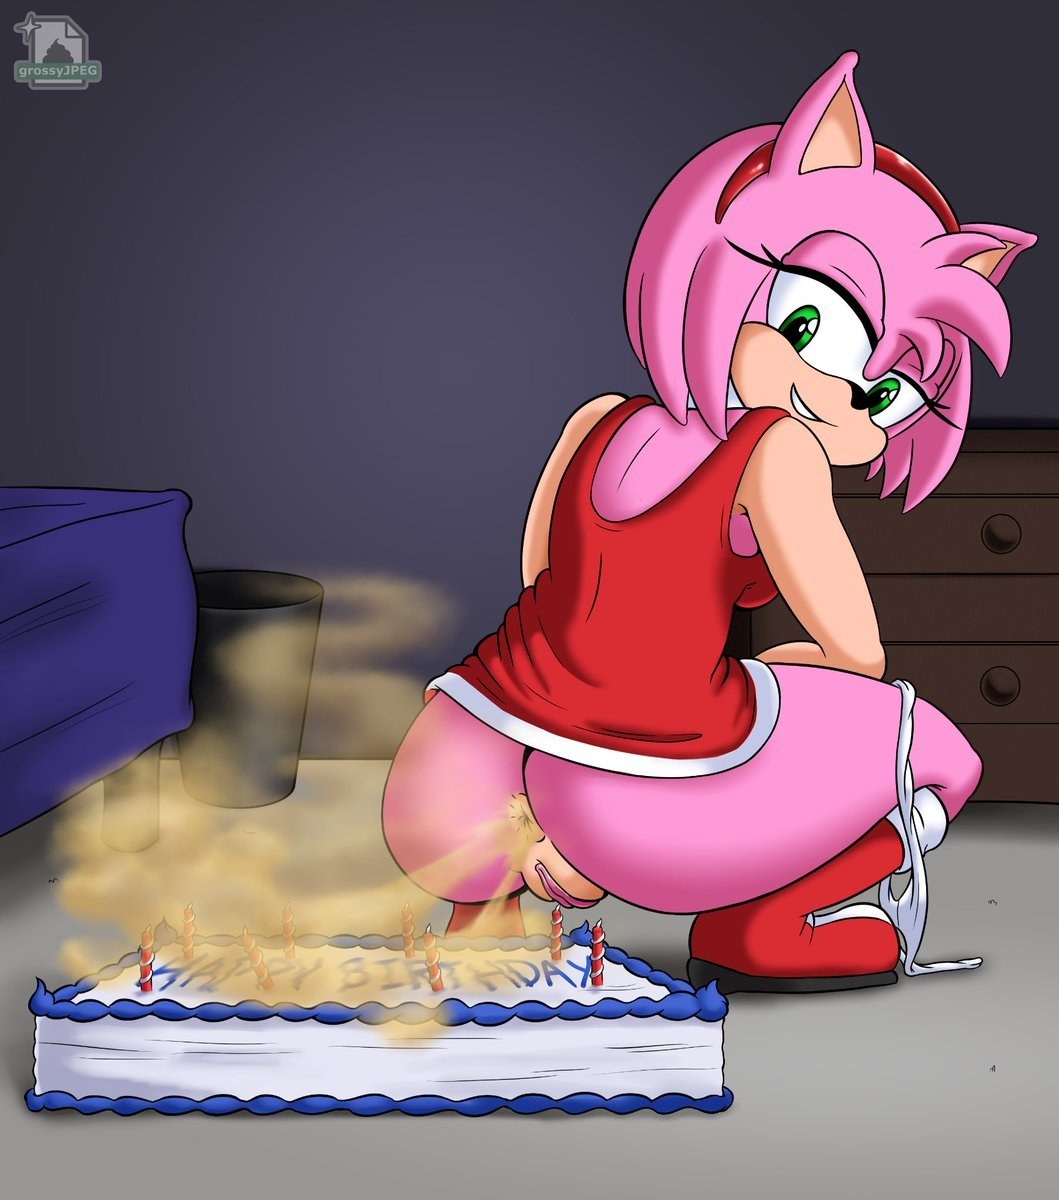 Amy rose cosplay porn